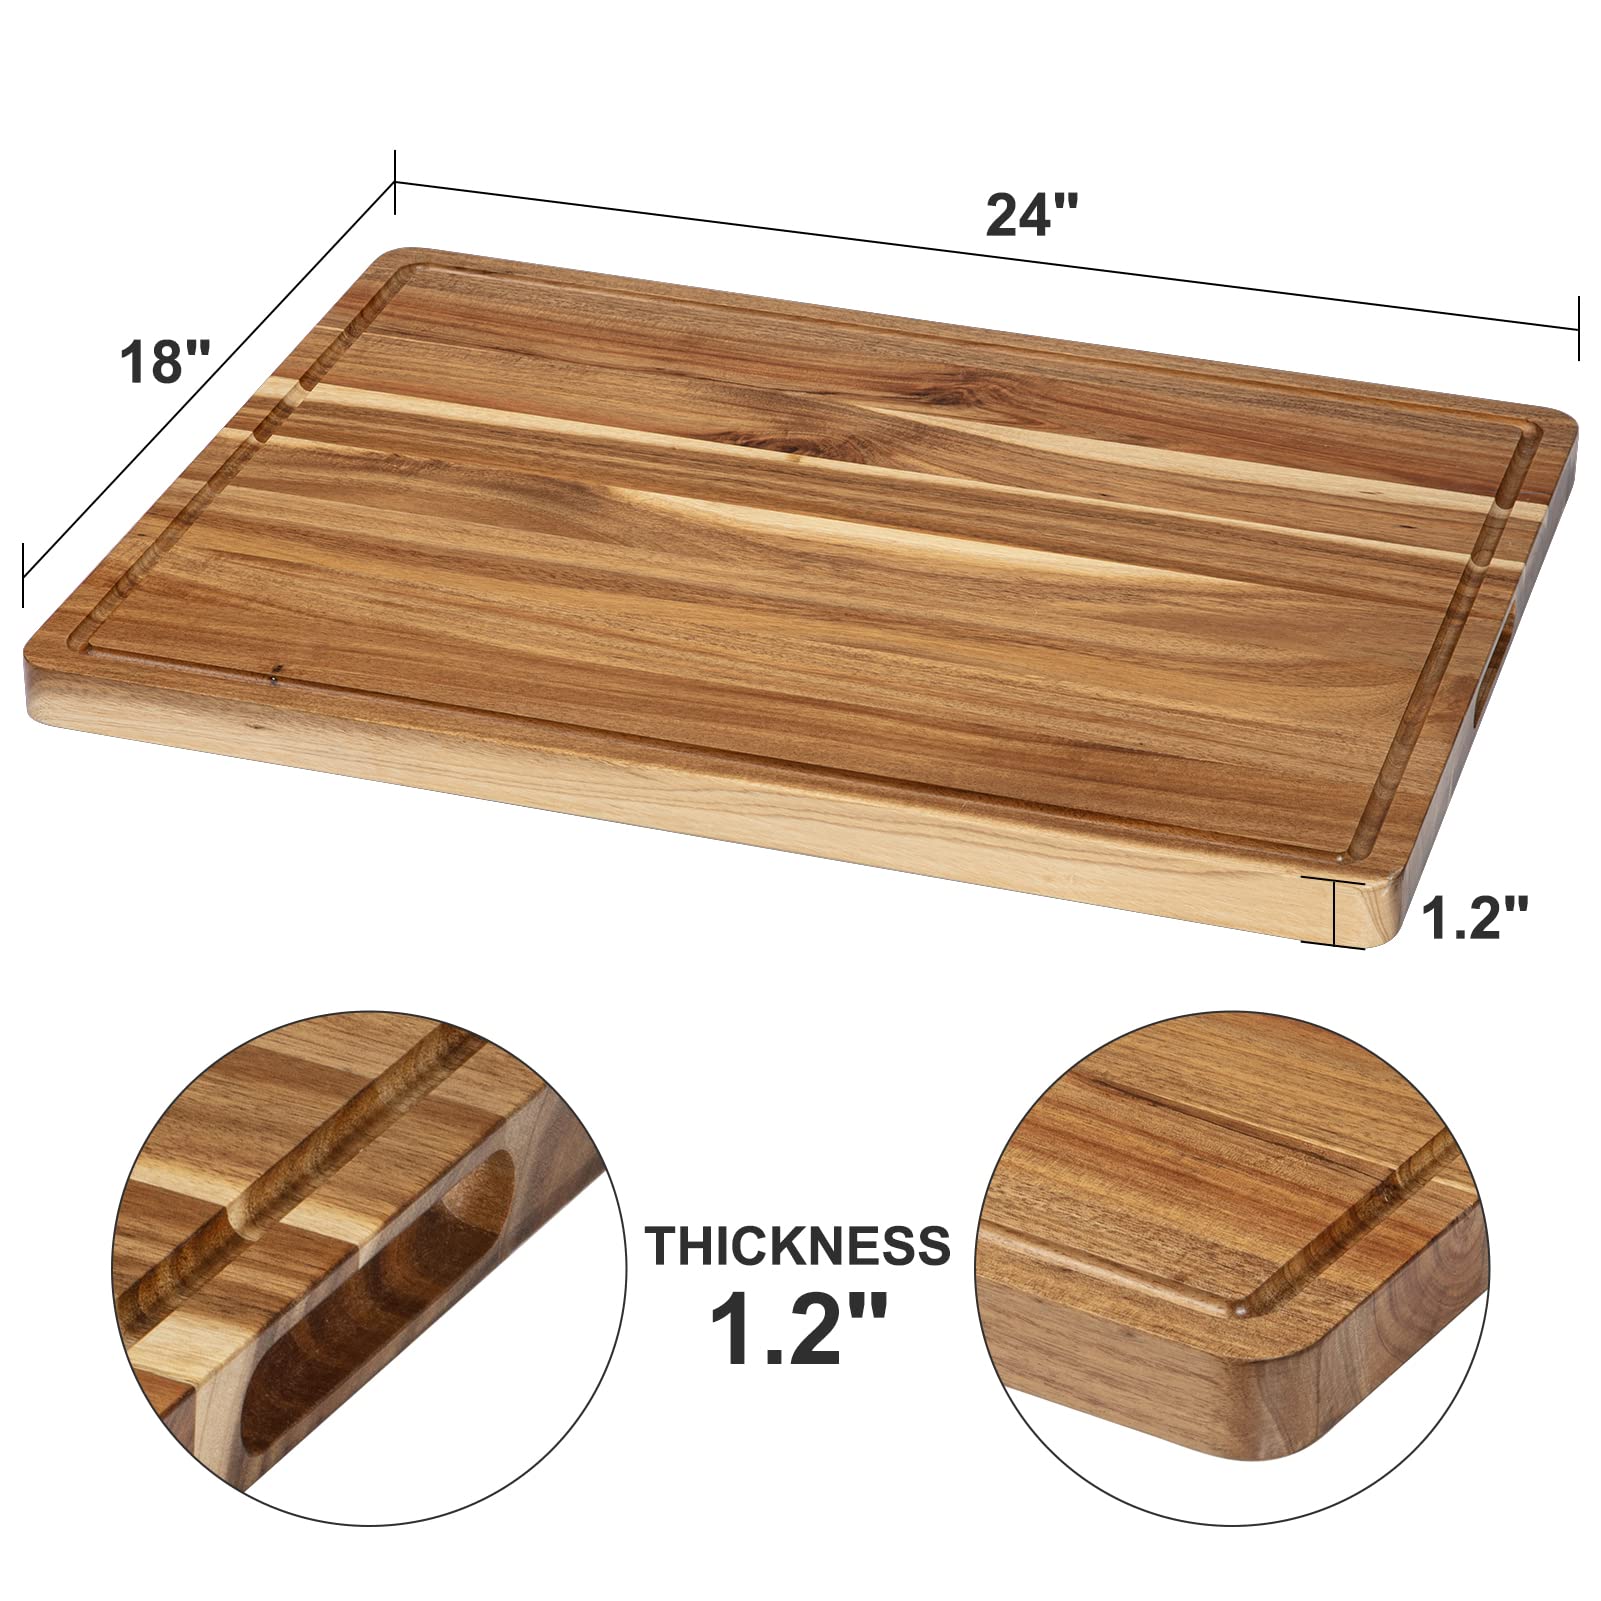 Glowsol Large Acacia Wood Cutting Board, 24 x 18 Inch Extra Large Wood Cutting Board For Kitchen With Side Handles And Juice Slot, Reversible Butcher Block Cutting Board For Meat And Veggies